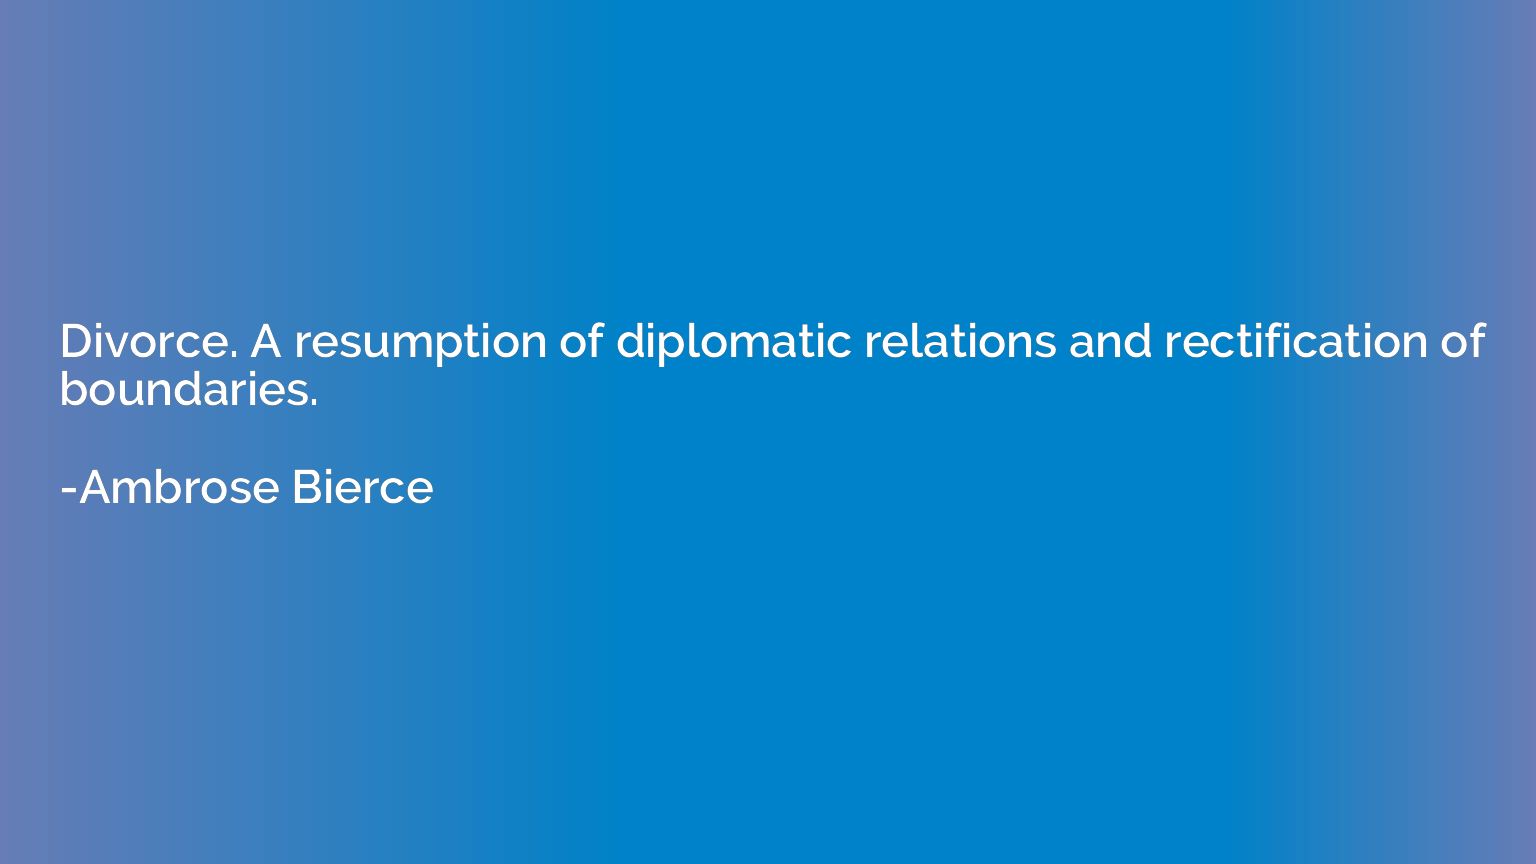 Divorce. A resumption of diplomatic relations and rectificat